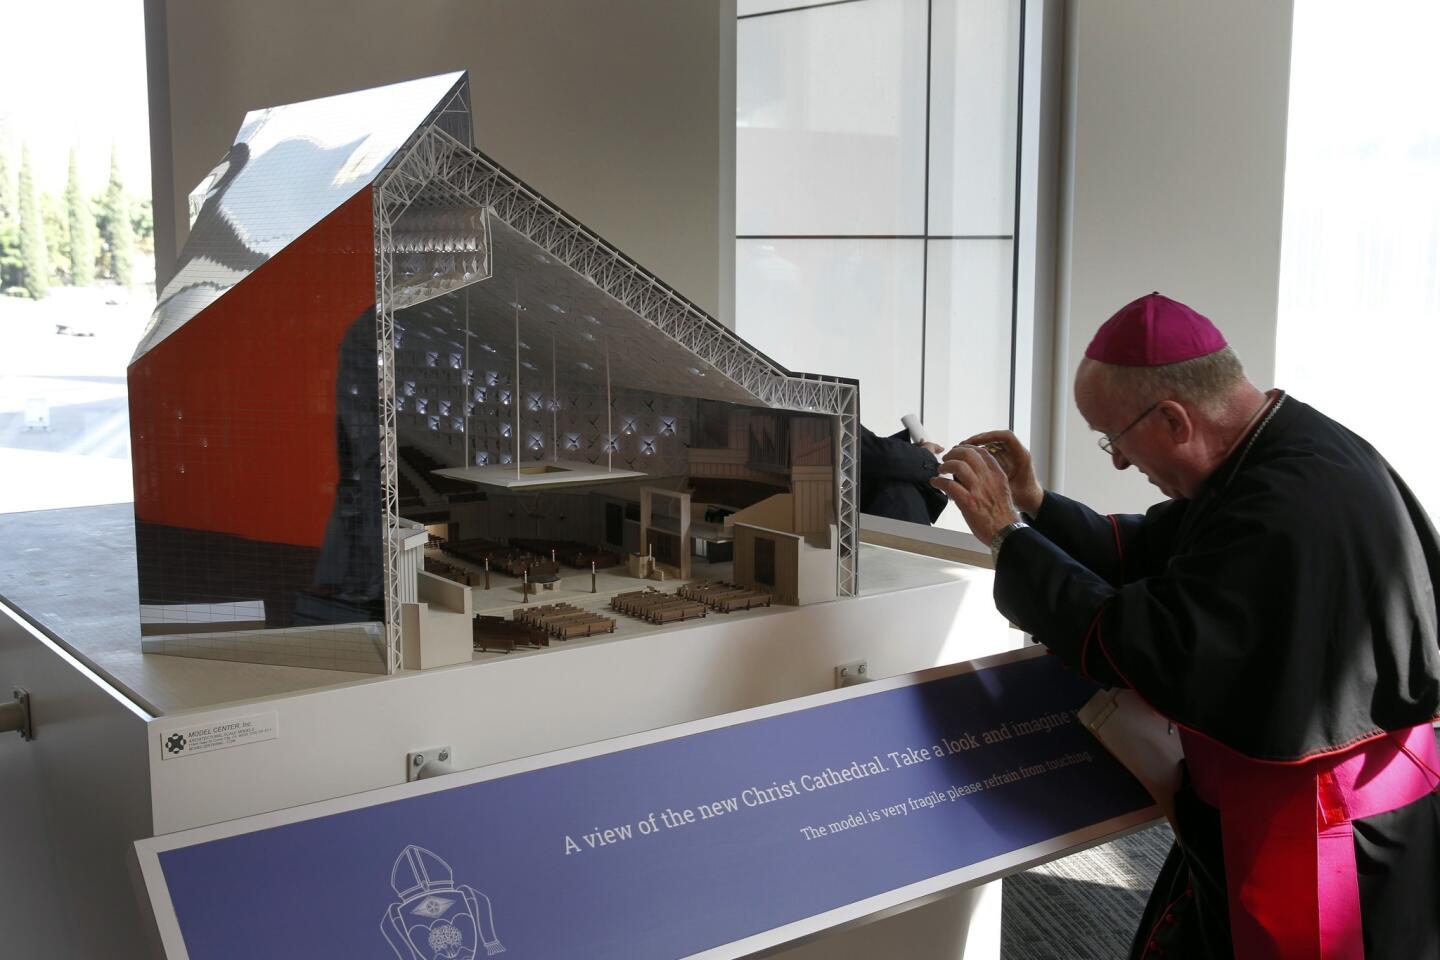 Bishop Rev. Kevin Vann takes a photo of a conceptual design model of the future Christ Cathedral, set to open in 2017.